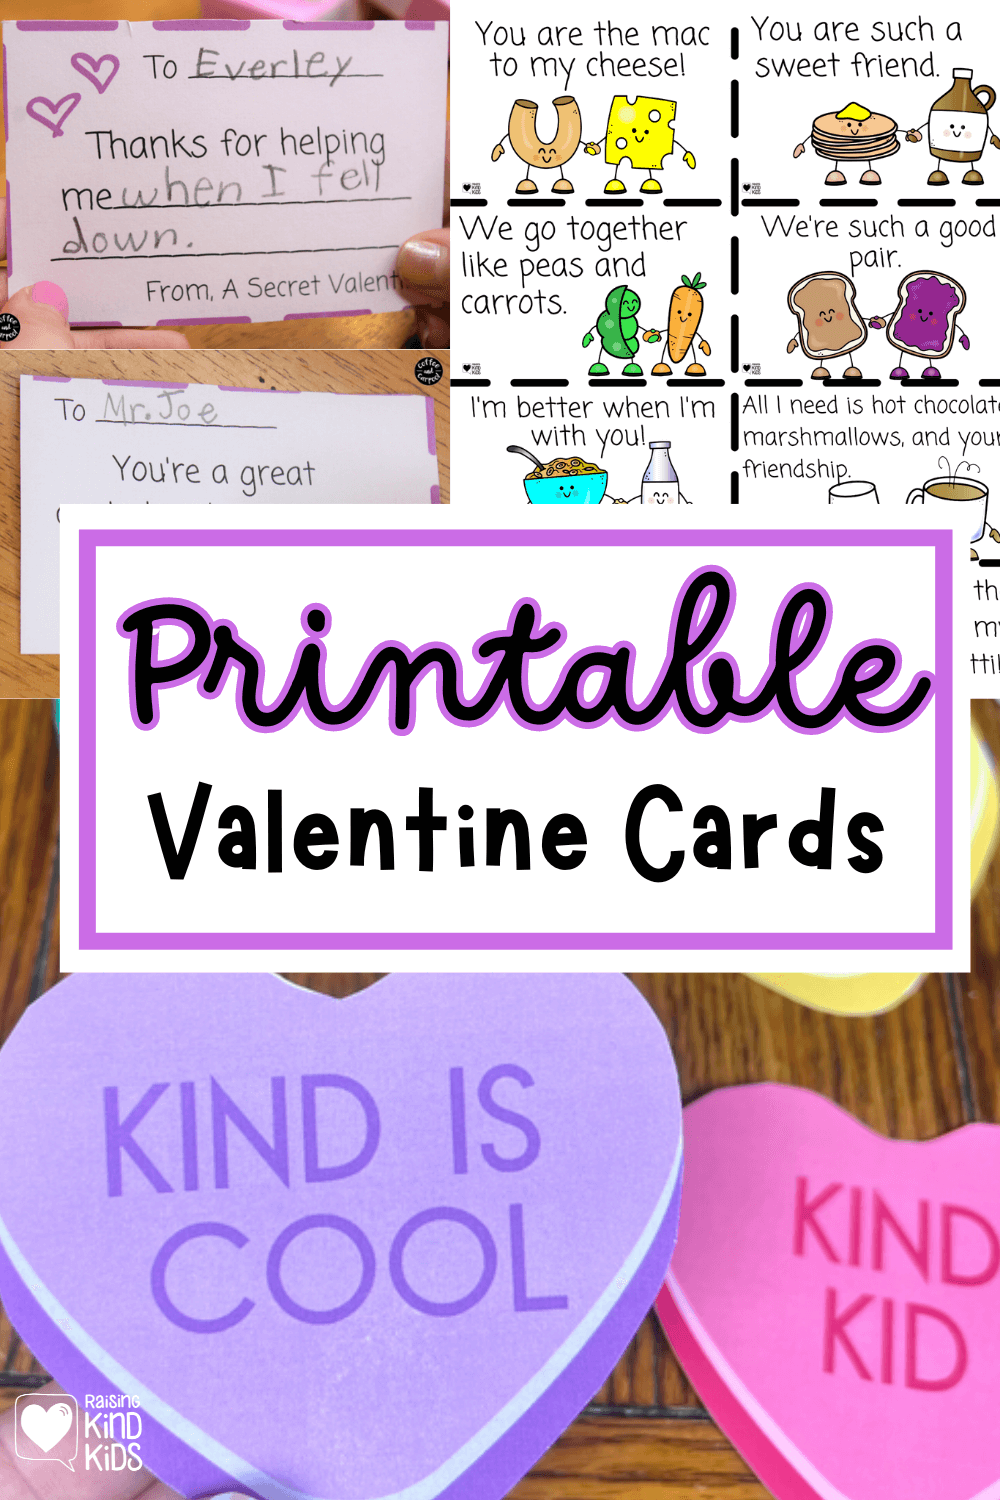 Choose from these printable Valentines cards for school and friends that kids can print for free and use to spread kindness.